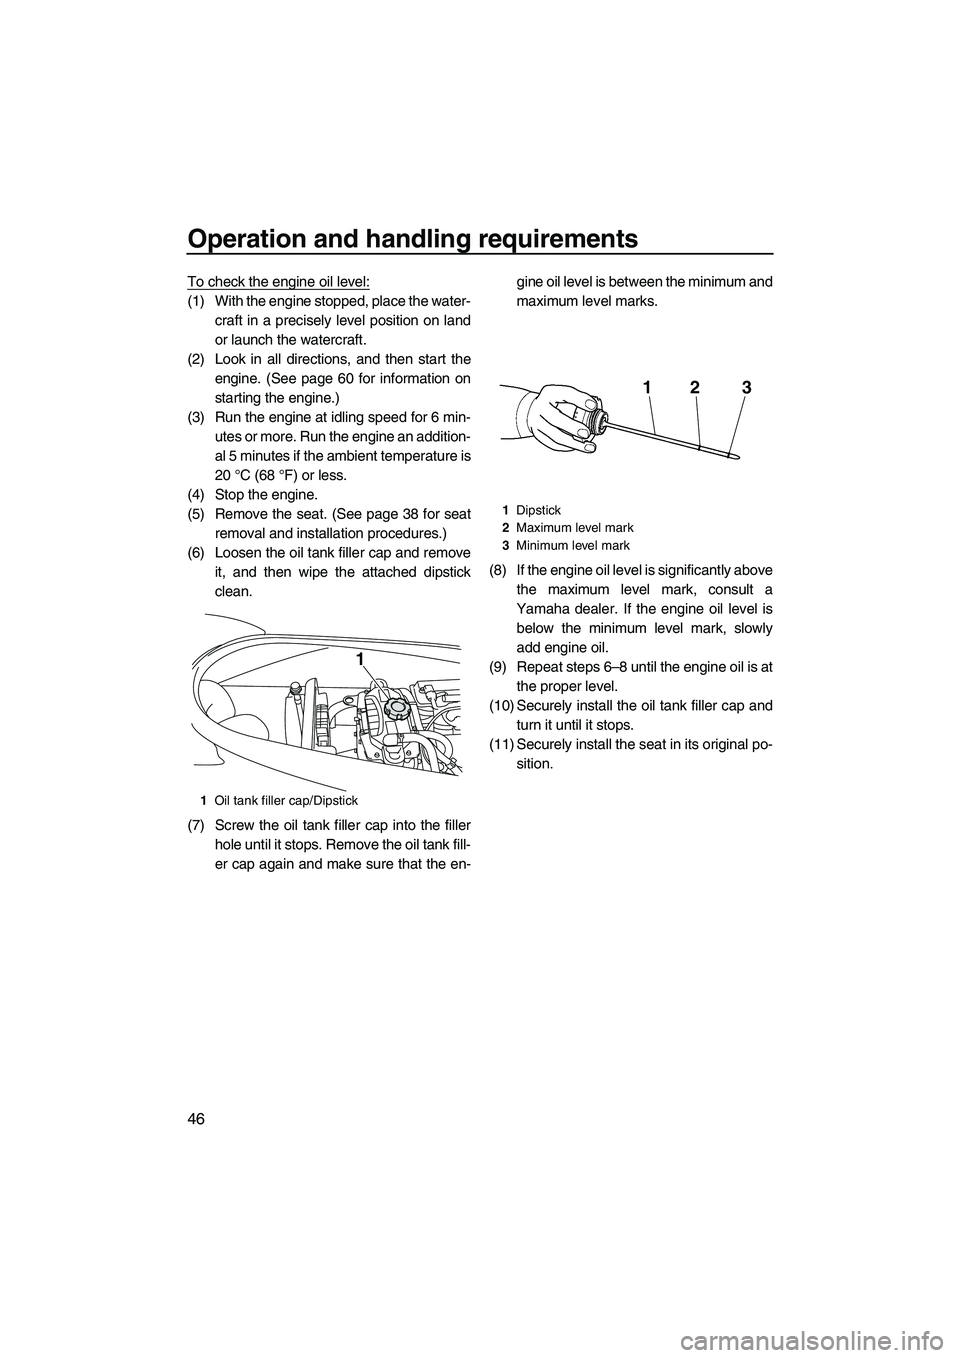 YAMAHA VX 2012  Owners Manual Operation and handling requirements
46
To check the engine oil level:
(1) With the engine stopped, place the water-
craft in a precisely level position on land
or launch the watercraft.
(2) Look in al